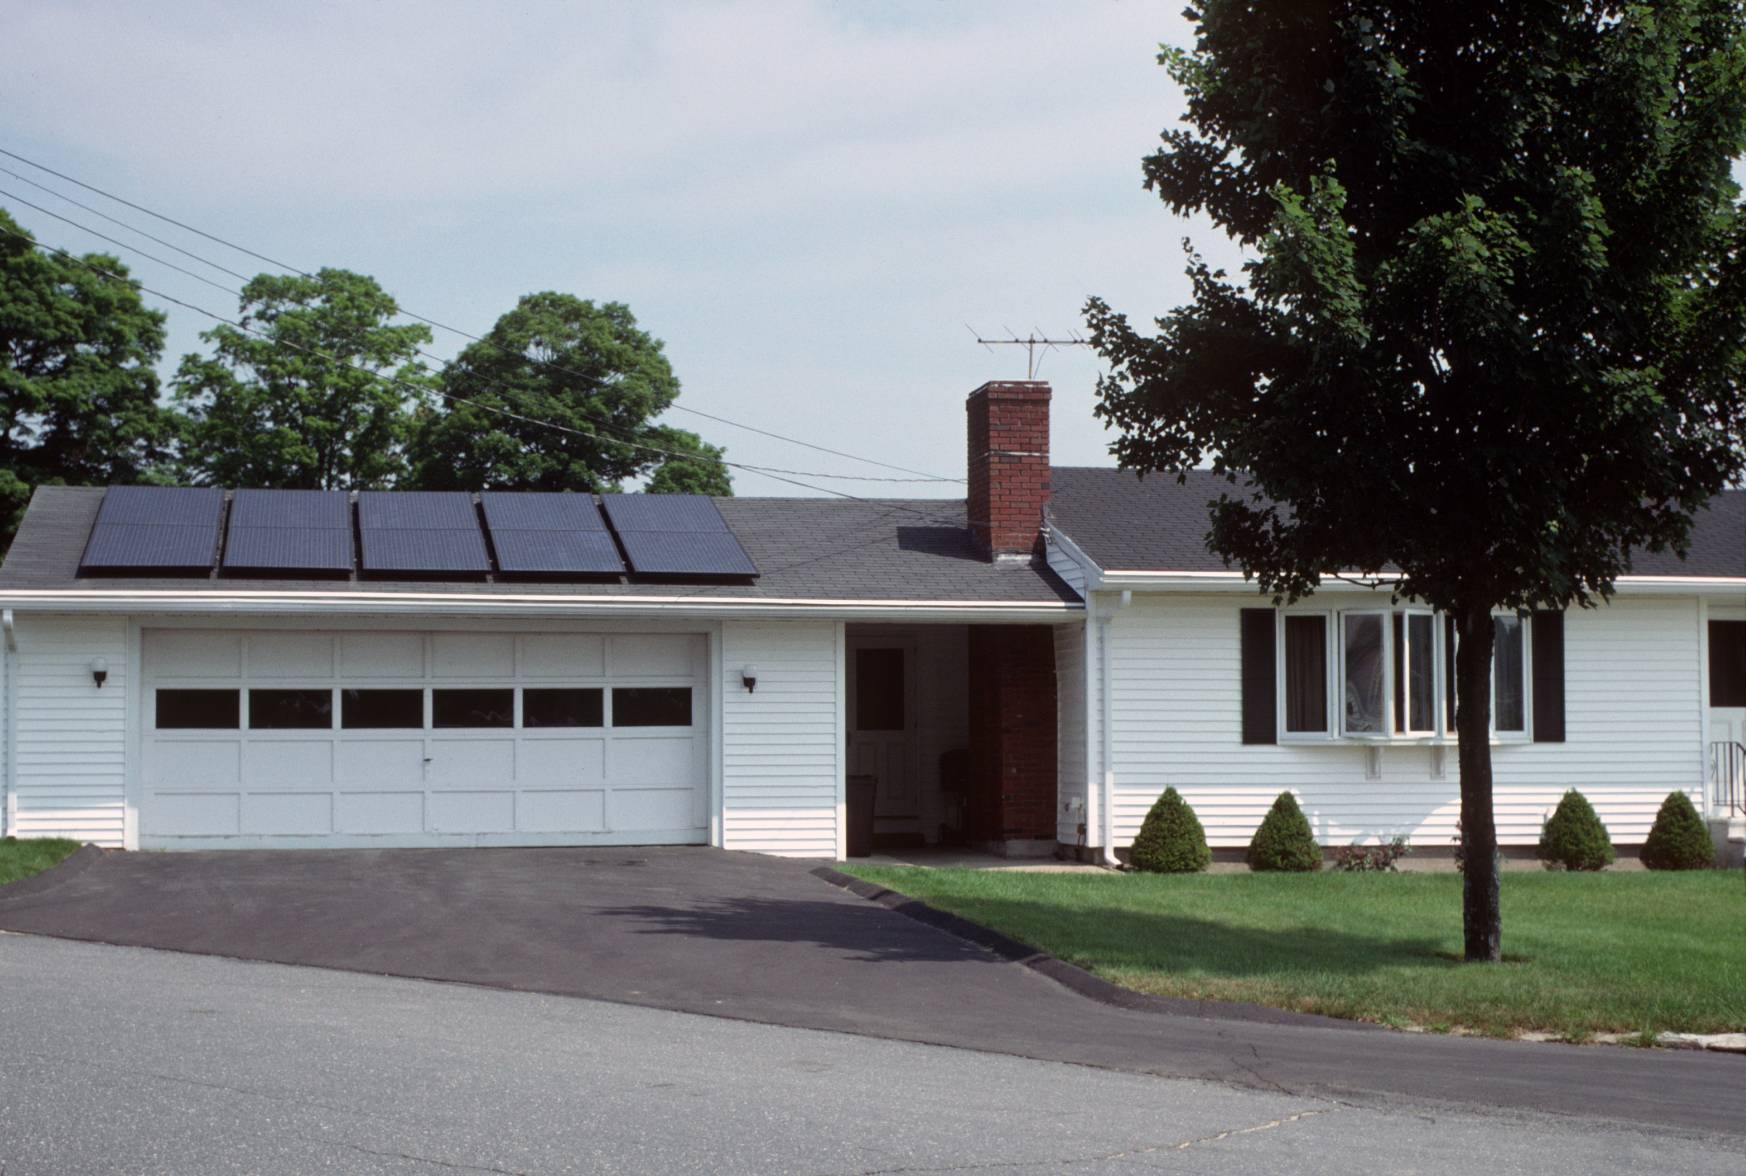 Photo of home with rooftop solar